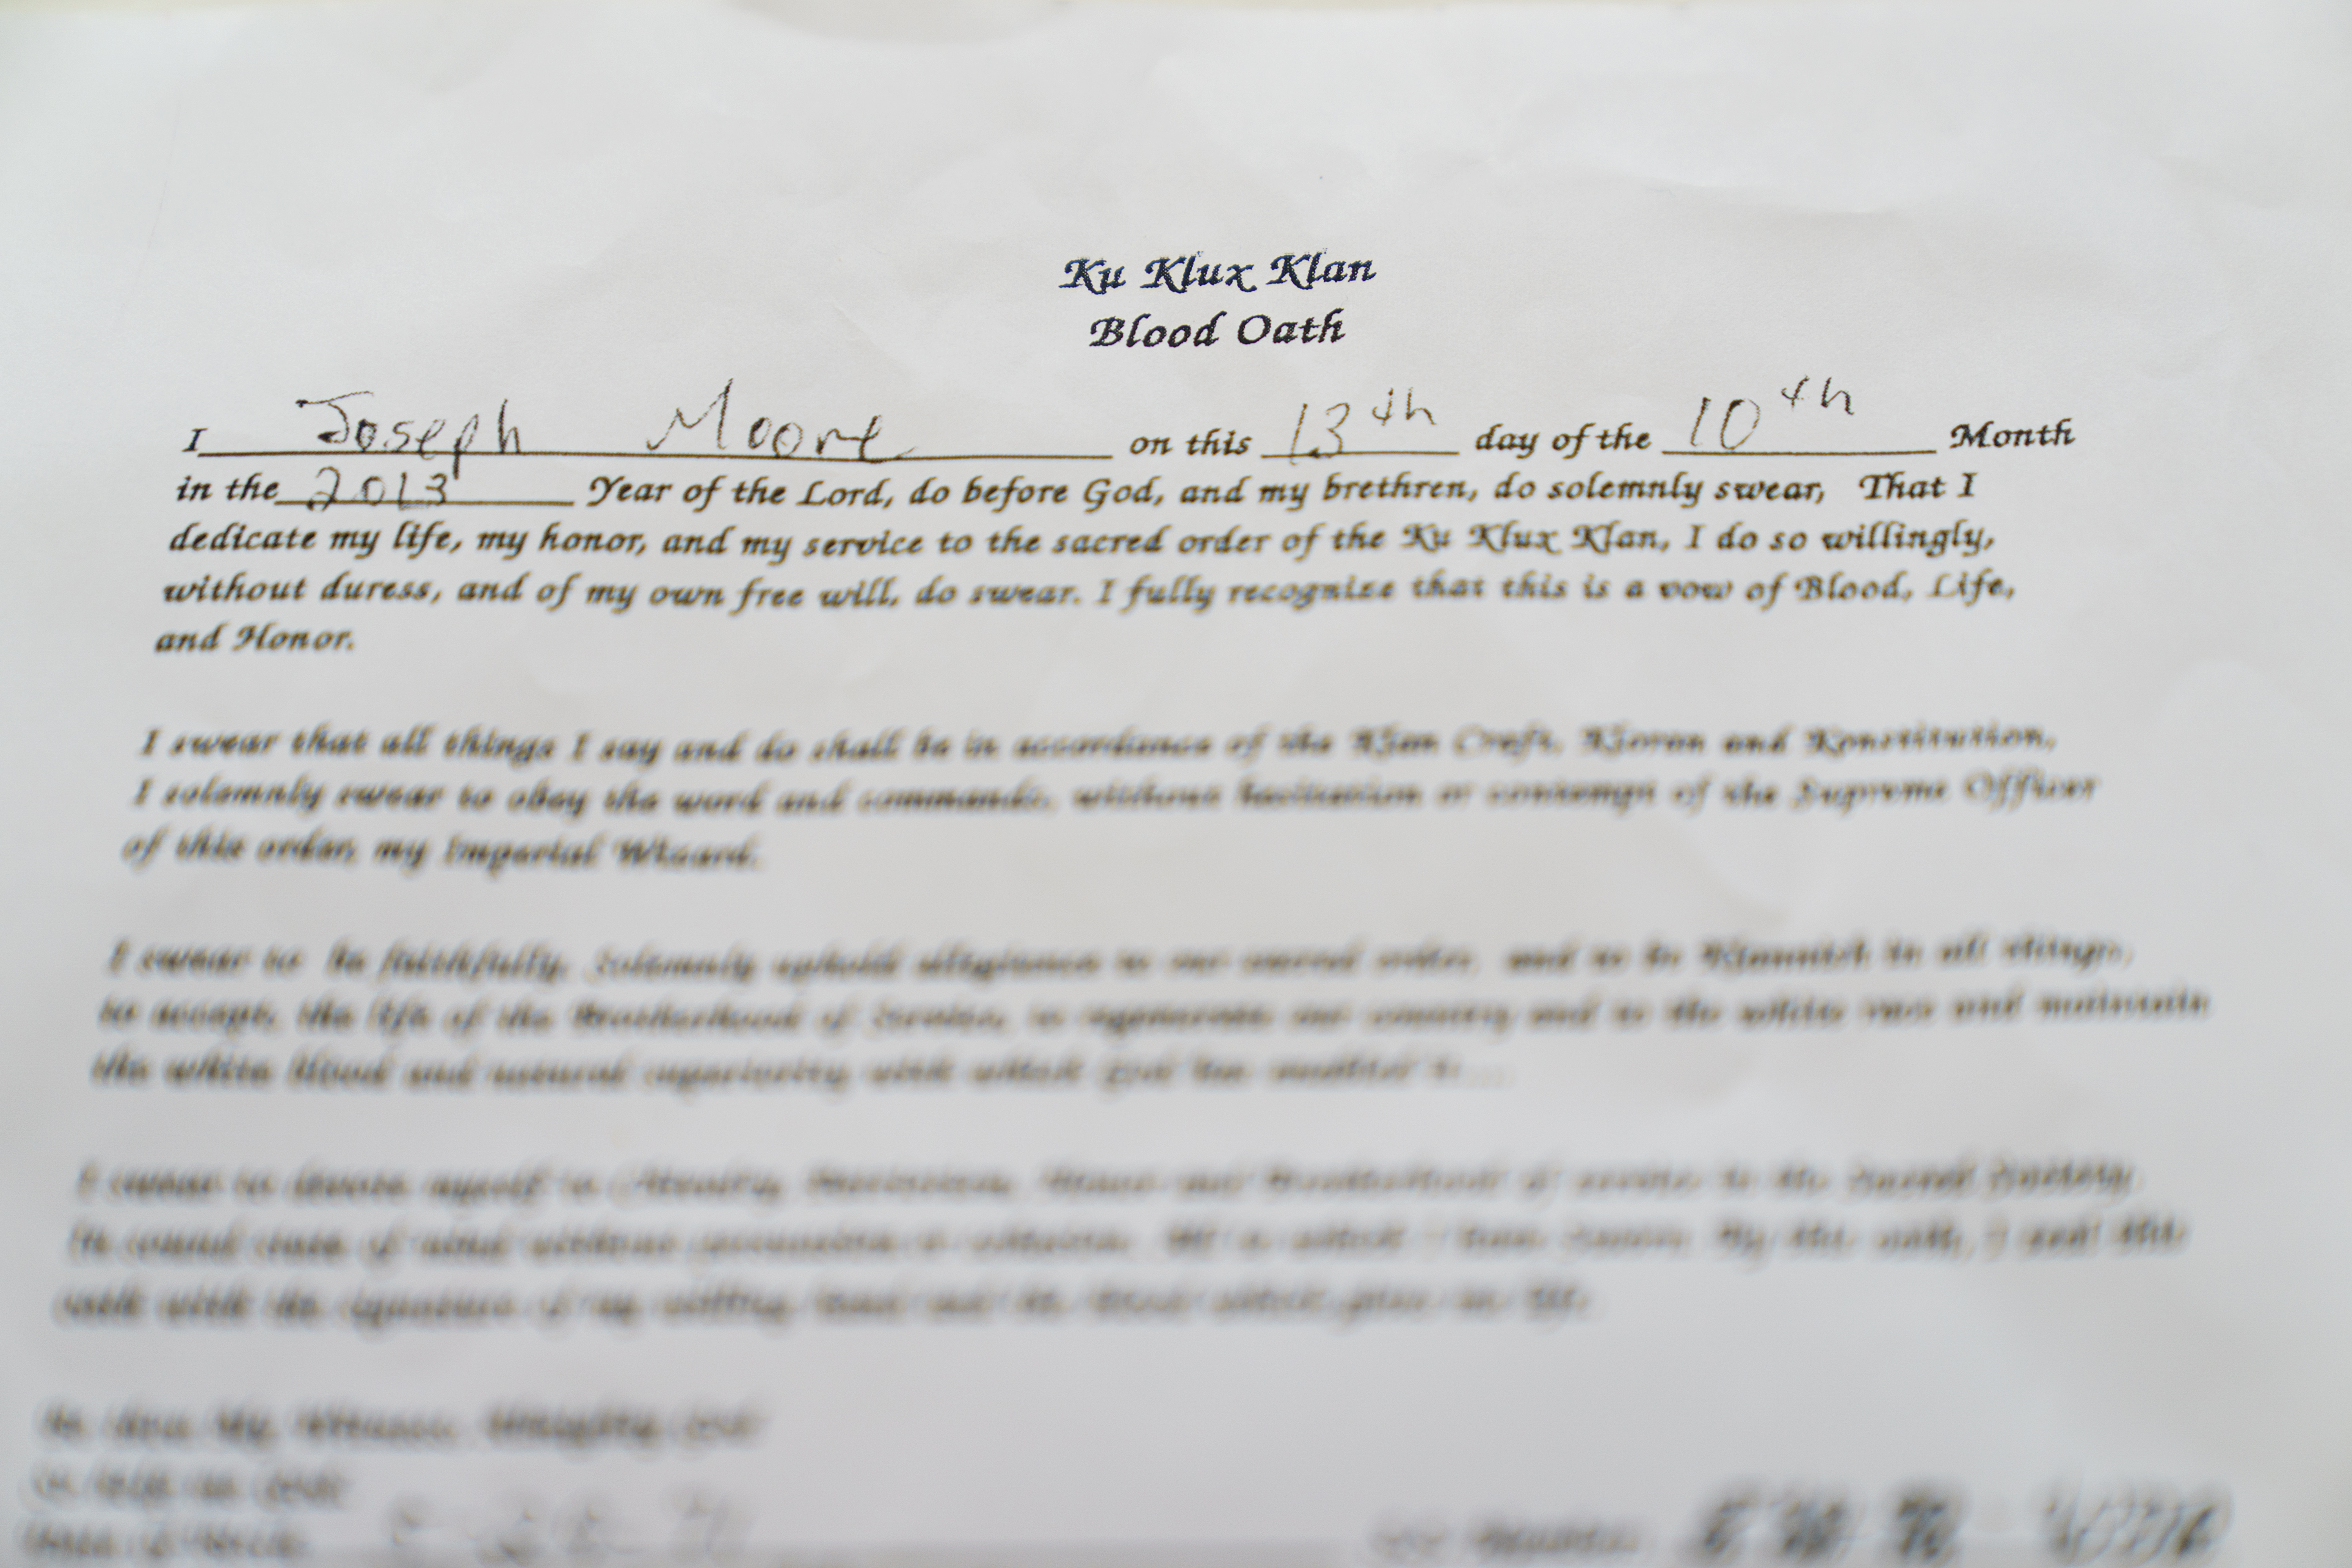 A Ku Klux Klan "blood oath" signed by Joseph Moore, an informant for the FBI.